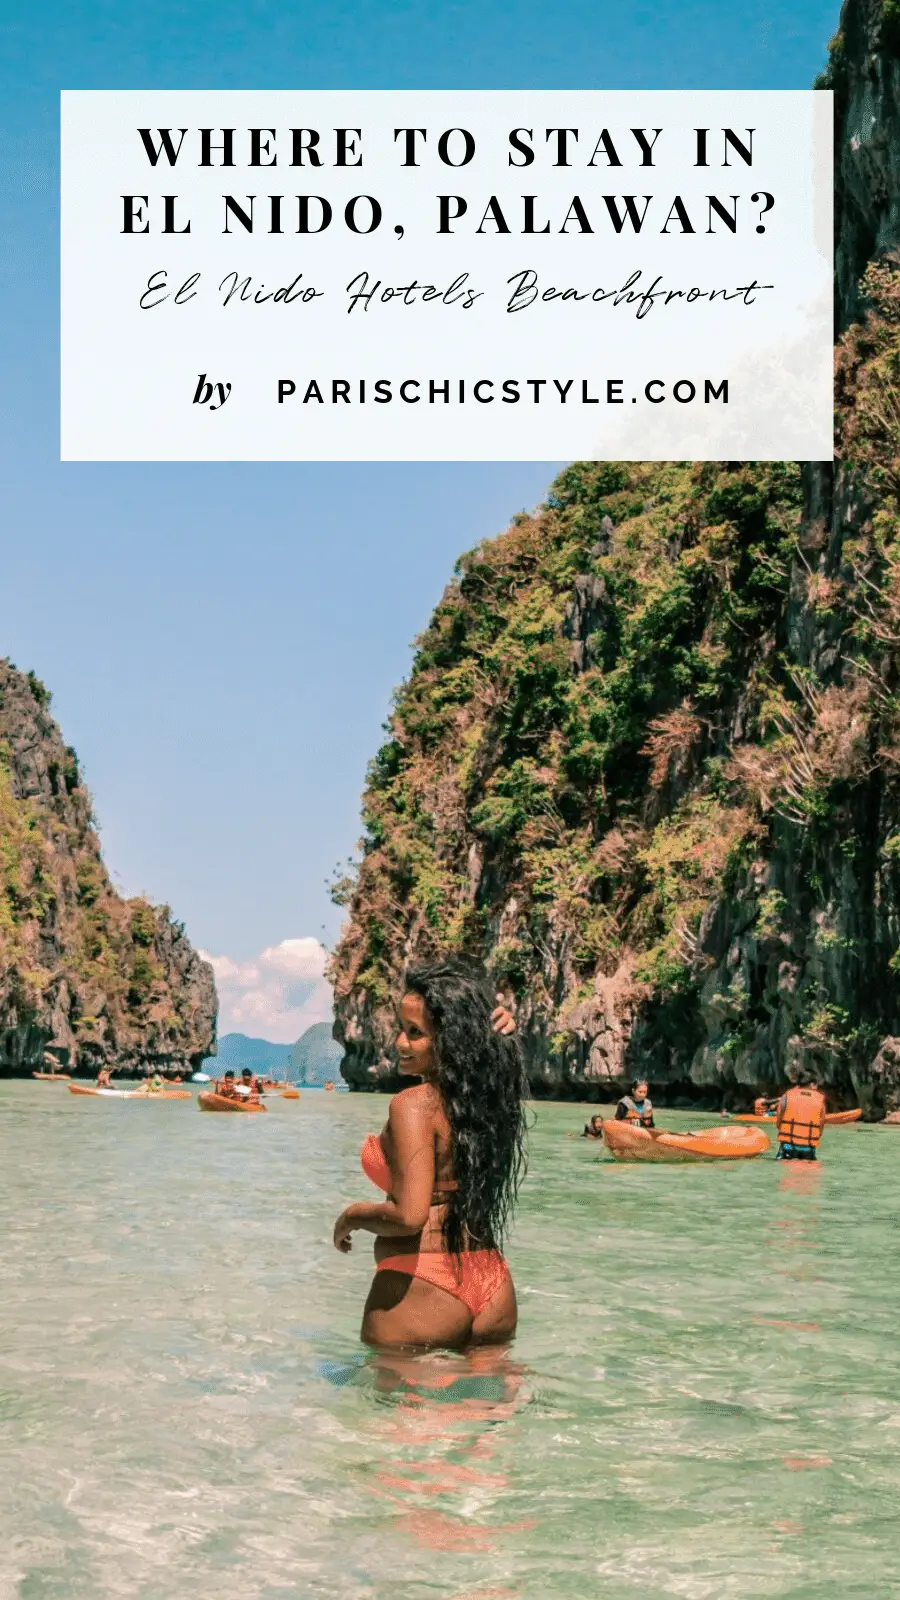 where to stay in el nido beachfront hotels palawan paris chic style pinterest